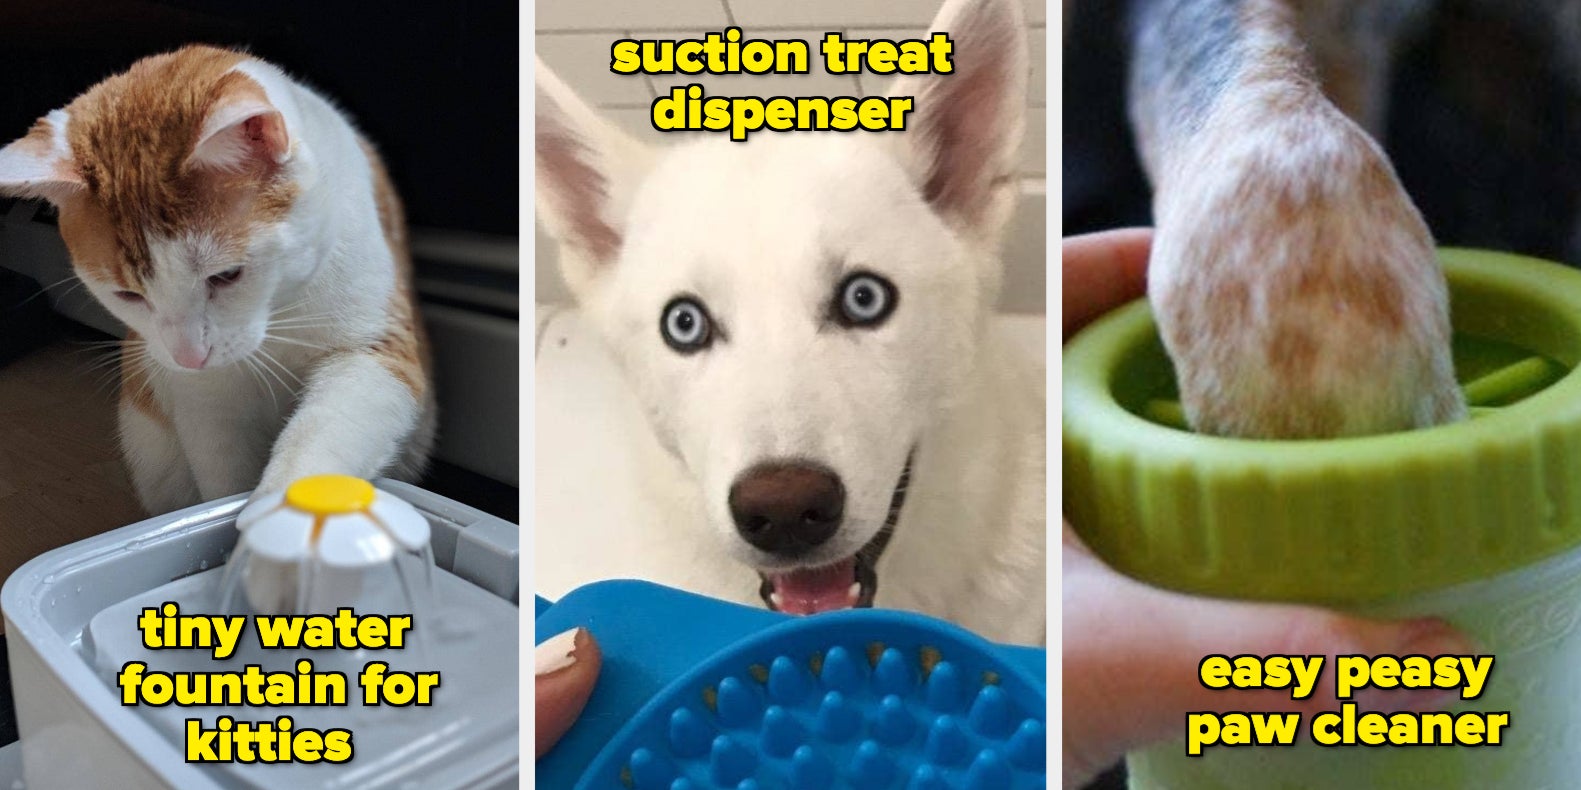 Our Go-To Pet Products That'll Make Life Easier